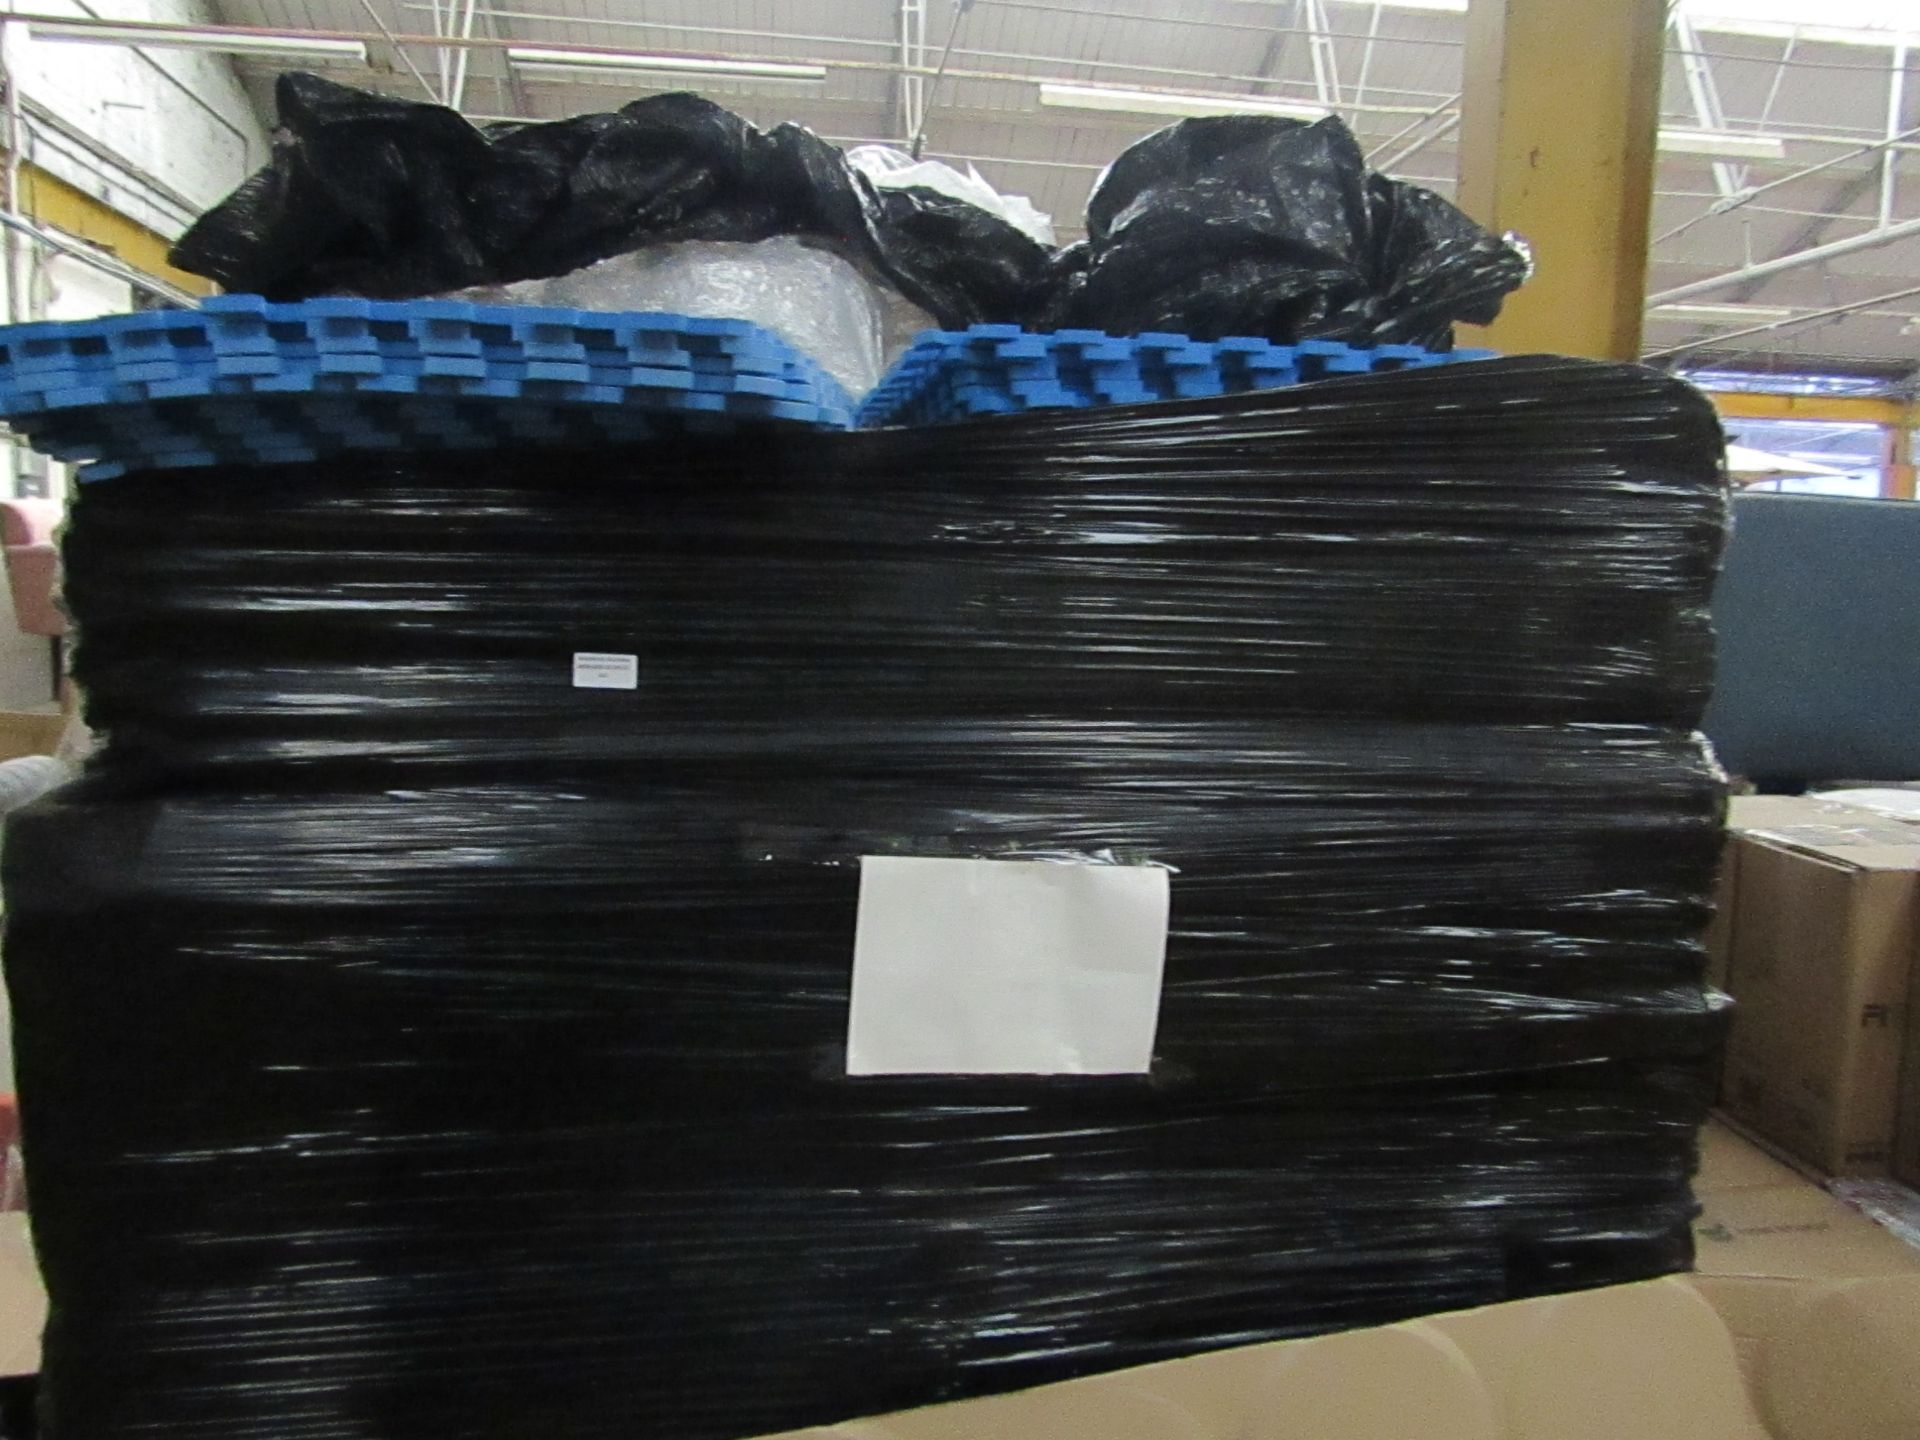 Pallet Containing Approx 350+ Foam Floor Mats - Assorted Sizes & Colours - Unchecked.